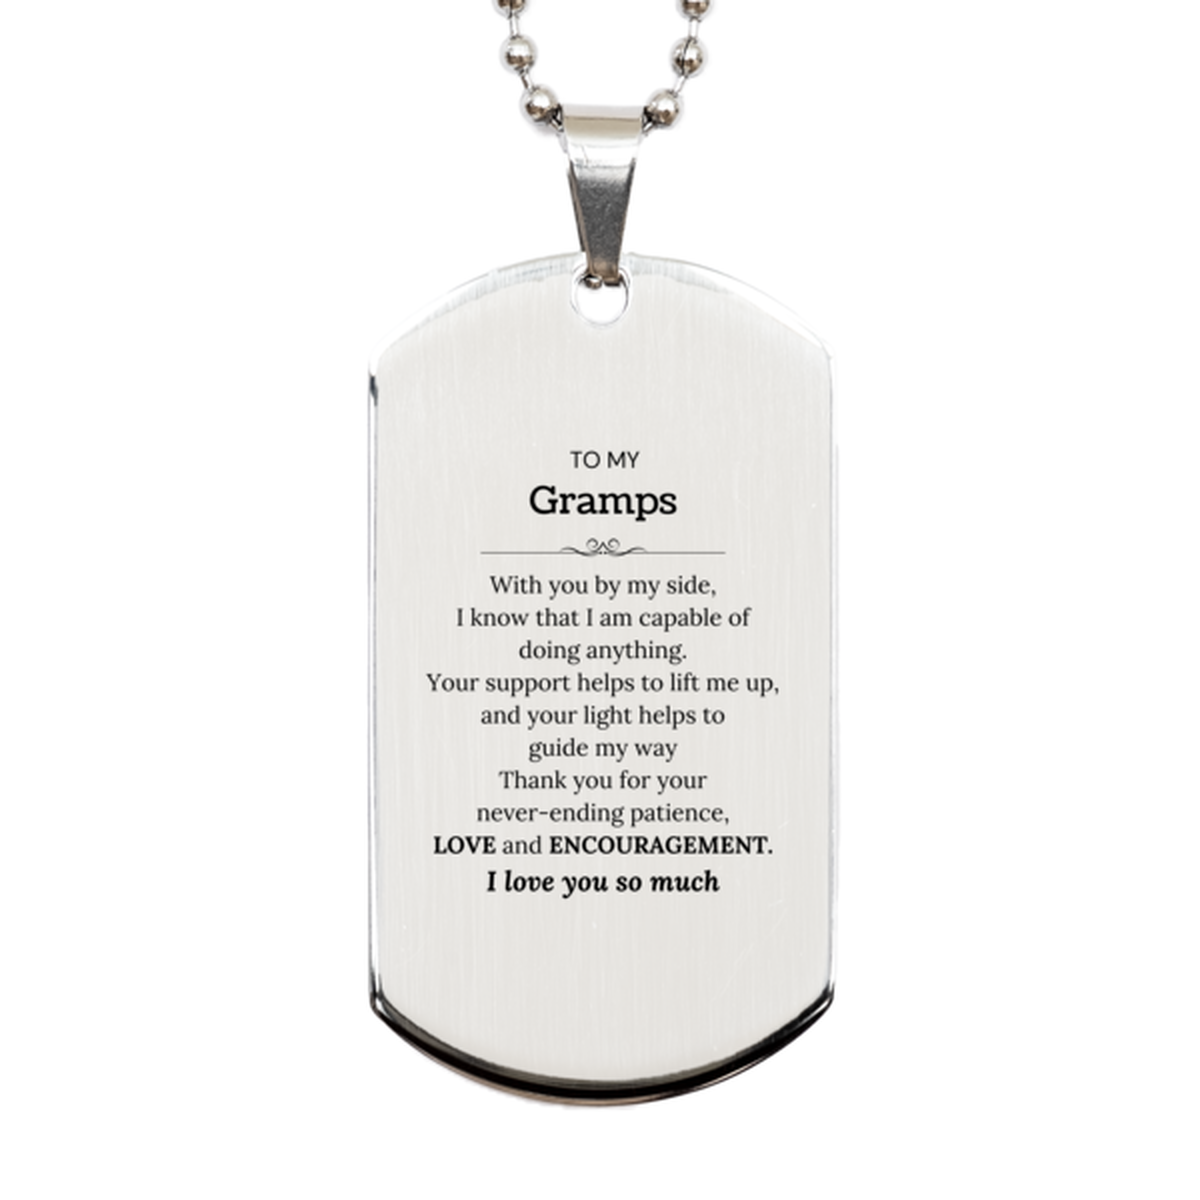 Appreciation Gramps Silver Dog Tag Gifts, To My Gramps Birthday Christmas Wedding Keepsake Gifts for Gramps With you by my side, I know that I am capable of doing anything. I love you so much